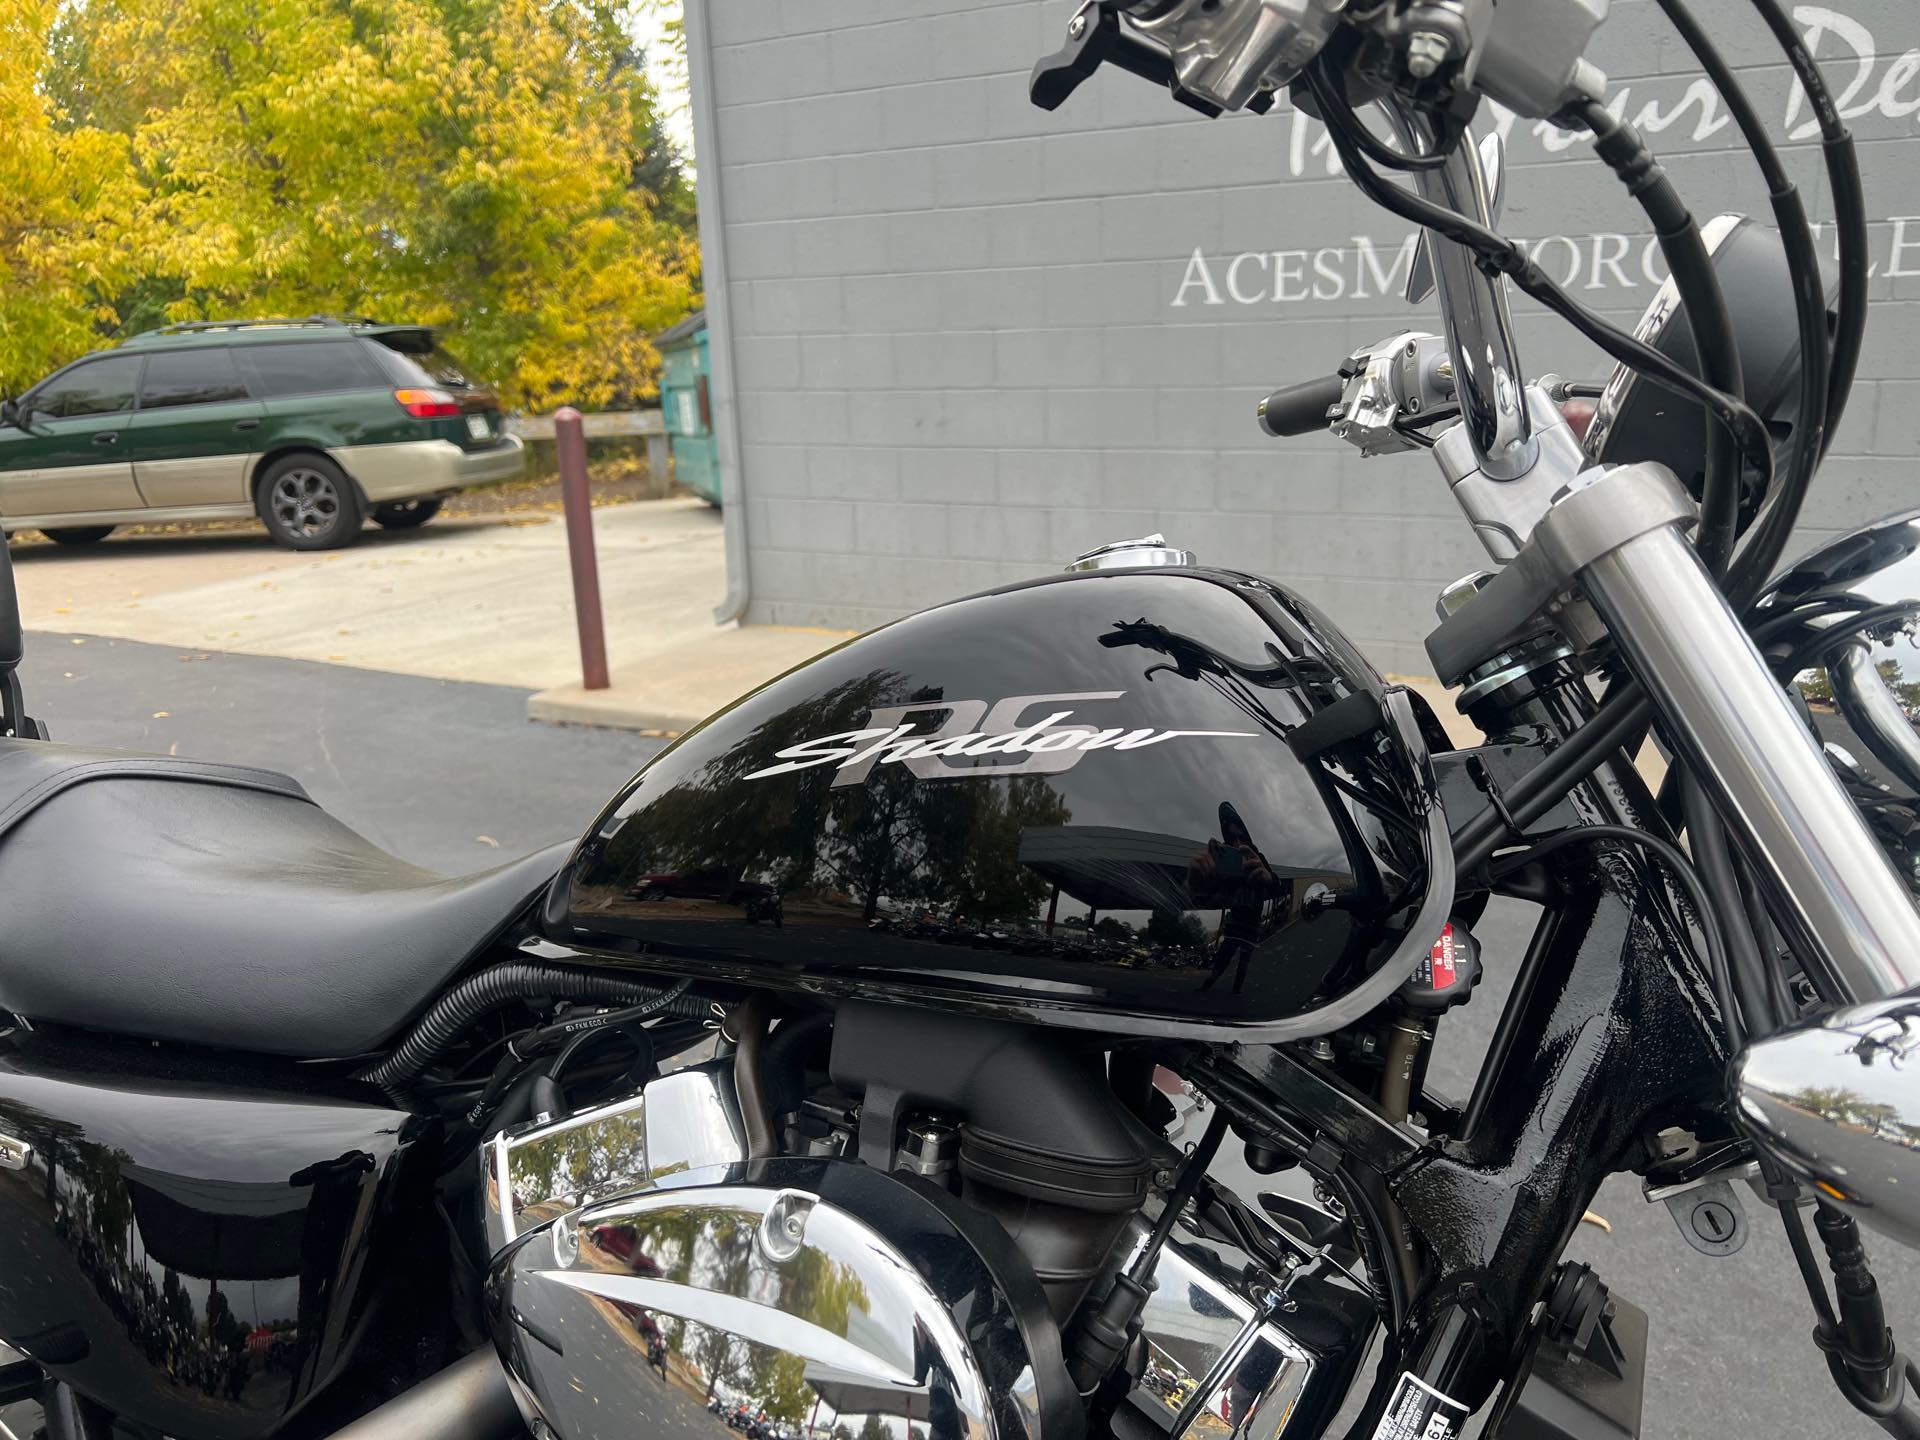 2013 Honda Shadow RS at Aces Motorcycles - Fort Collins